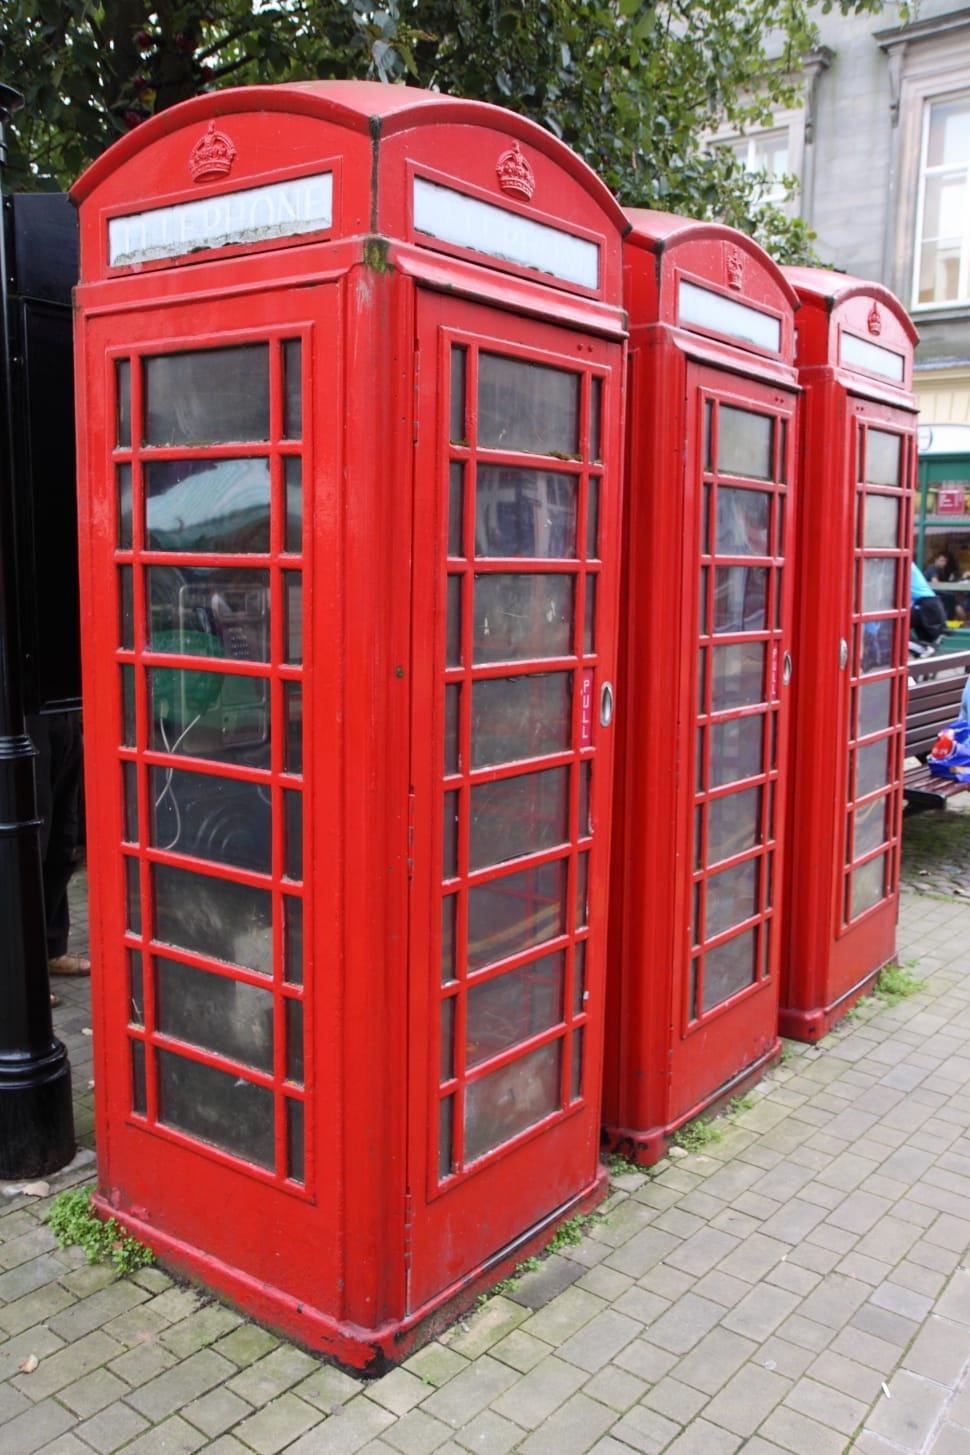 3 red telephone booths preview